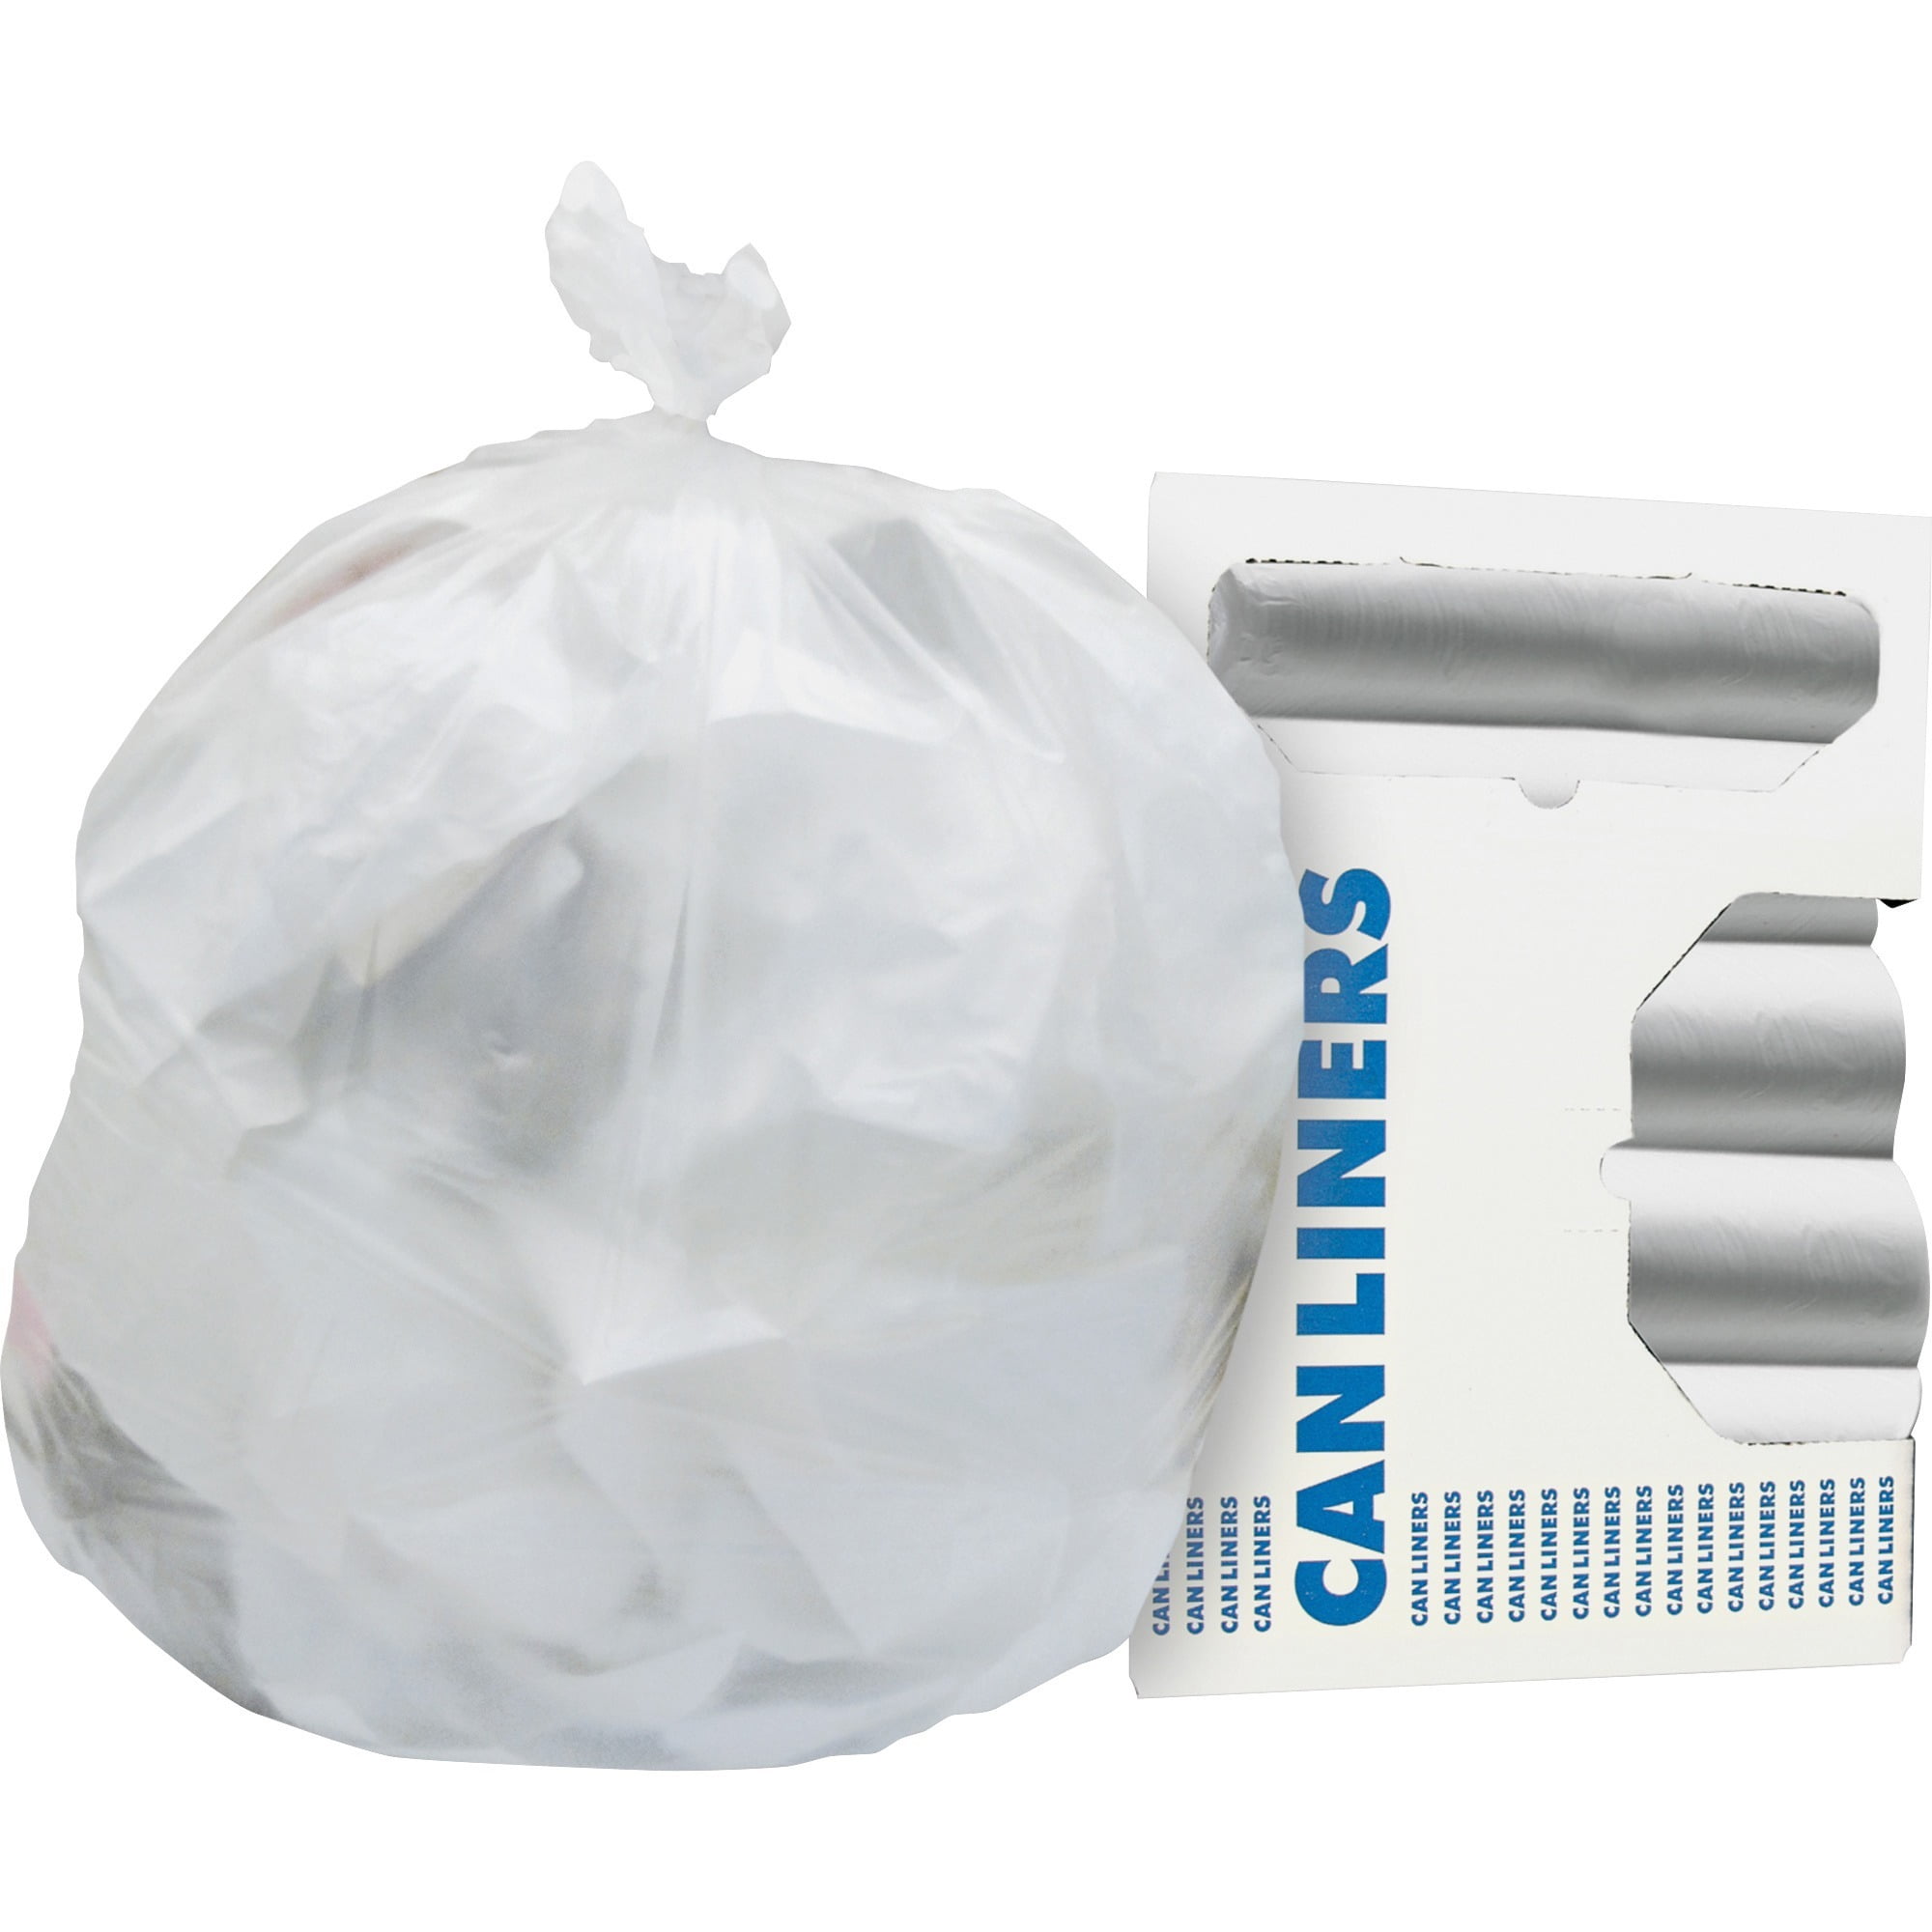 Inteplast HDPE Can Liners 24 x 33 Natural 6 Microns Pack of 1,000 Liners 